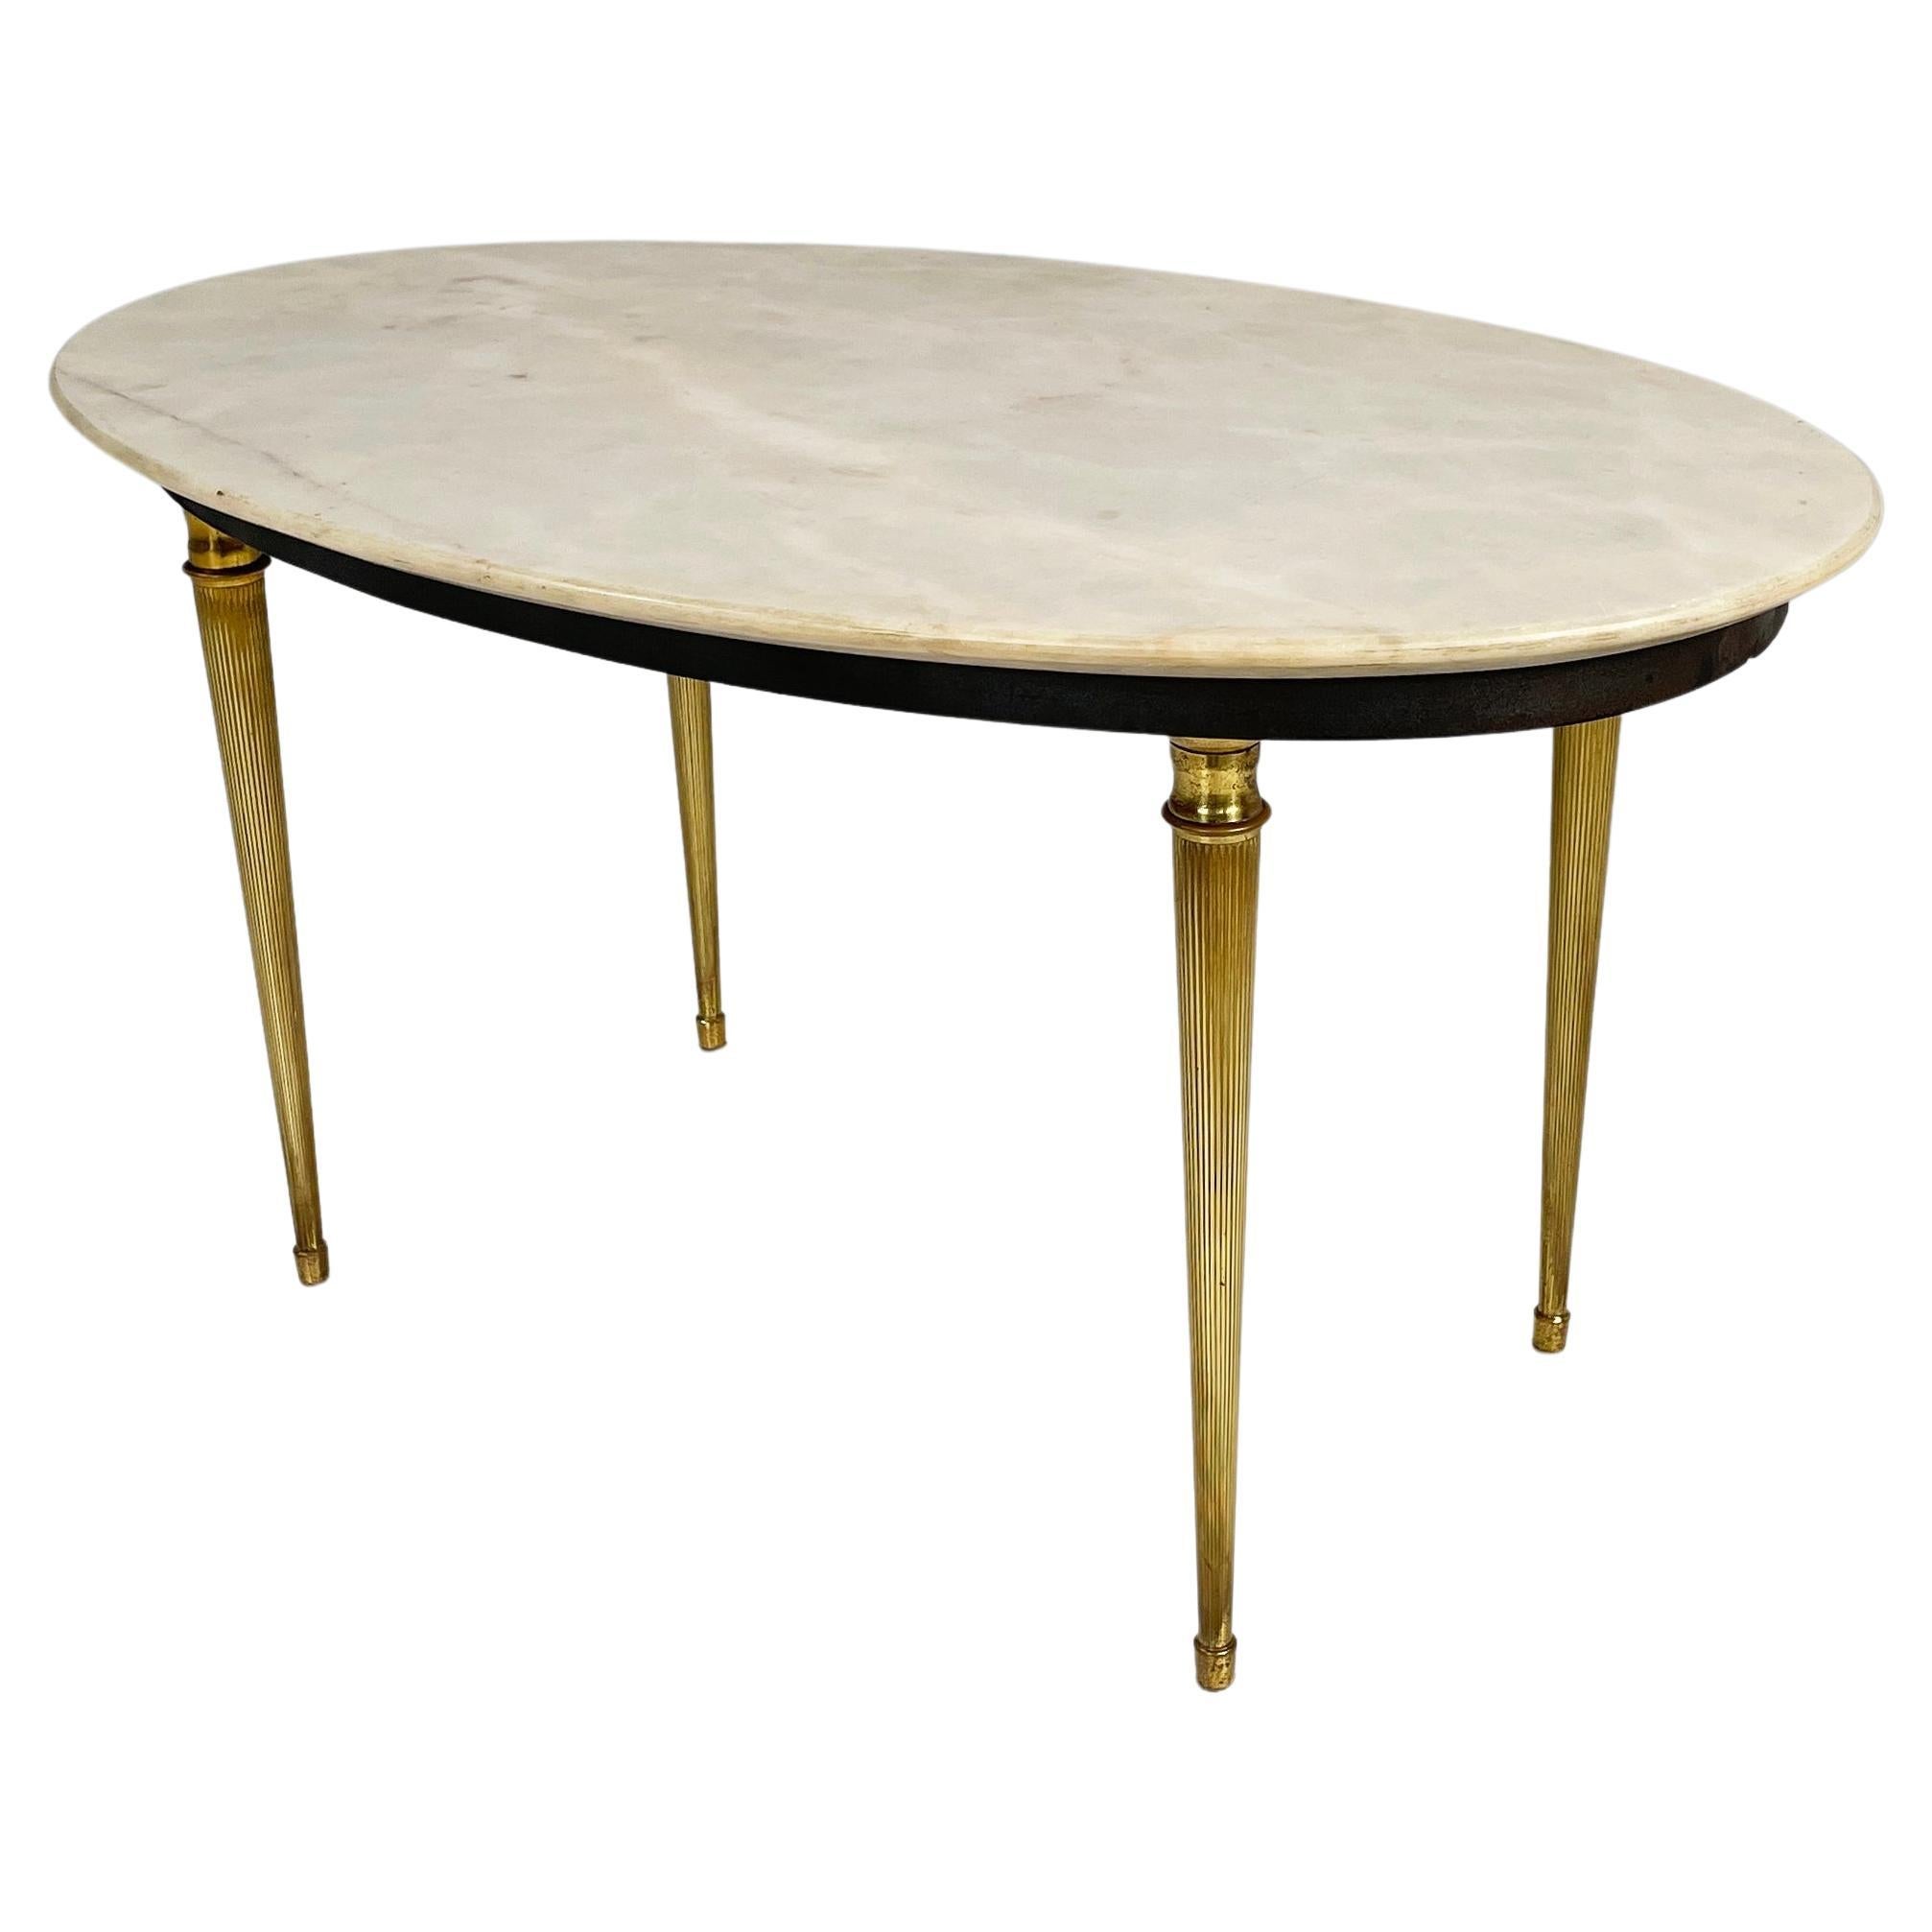 Italian mid-century modern Oval coffee table in light marble and brass, 1950s